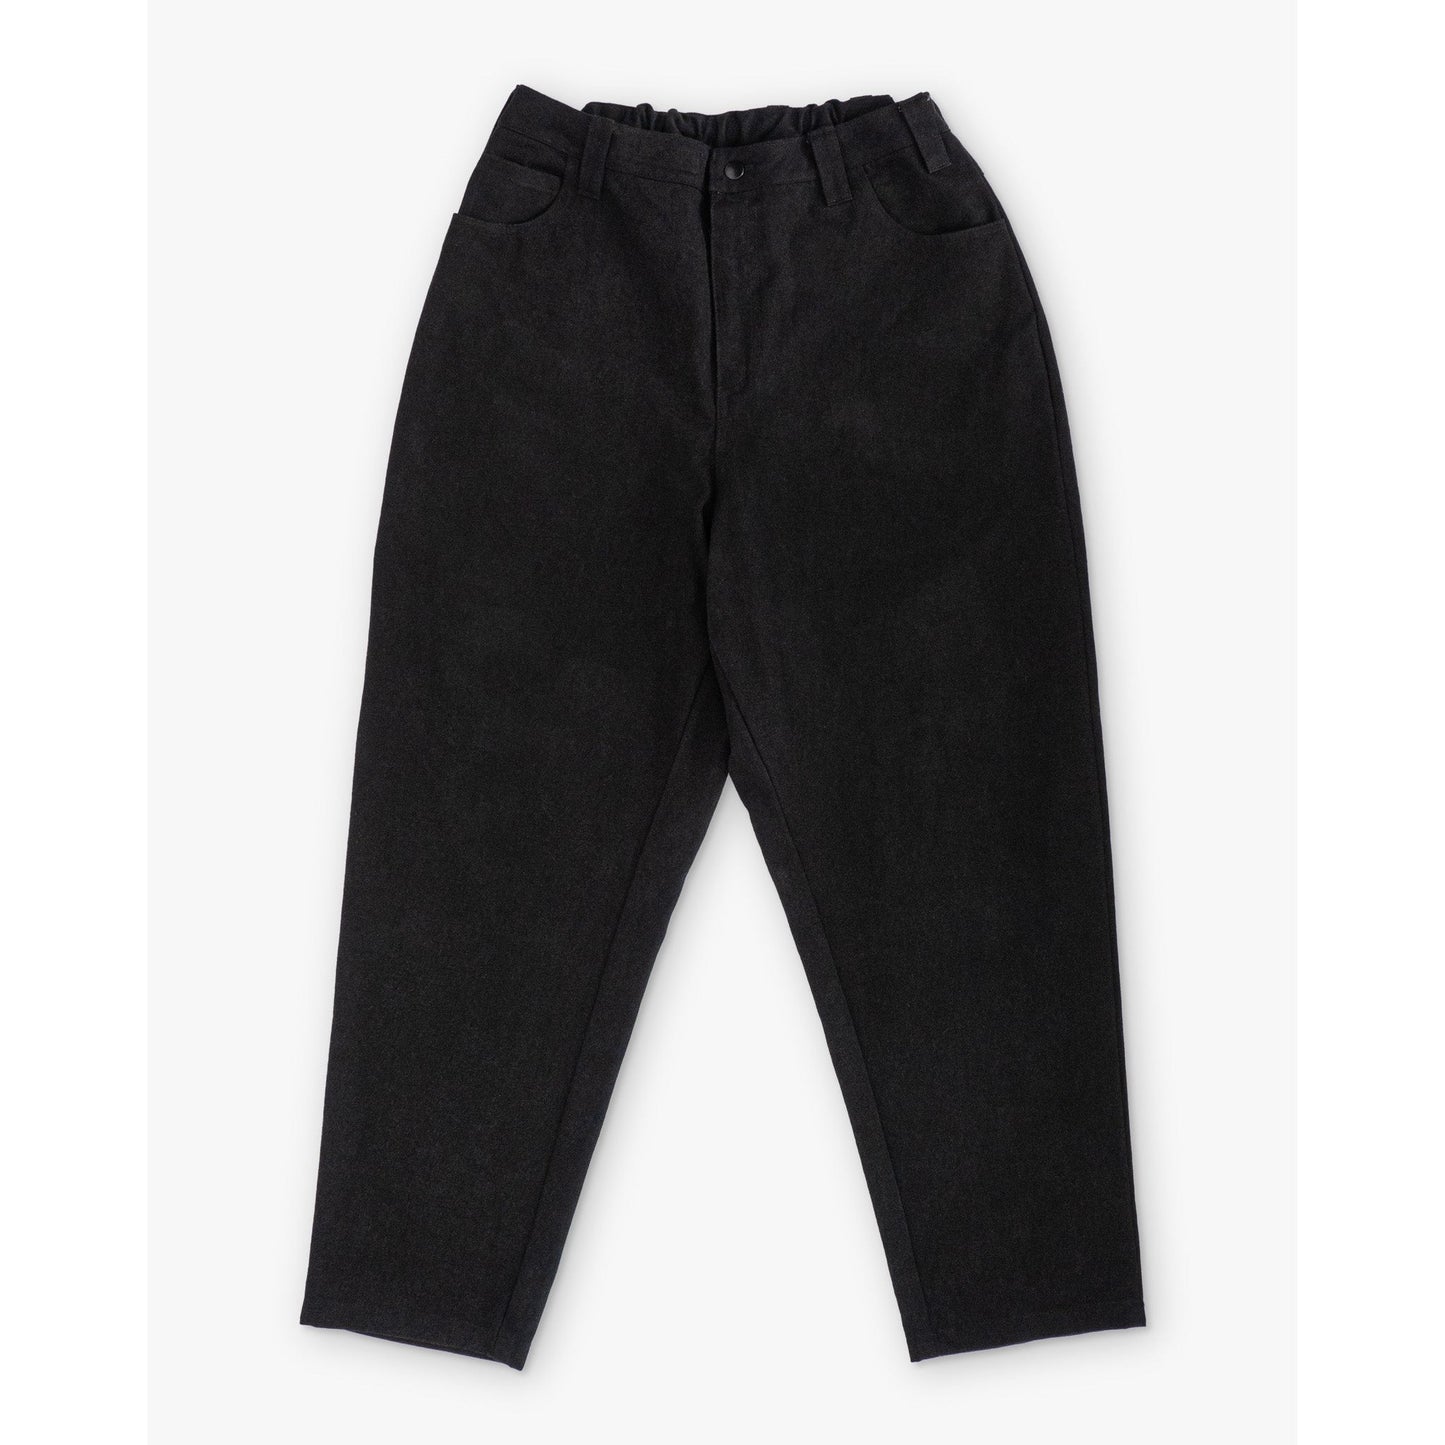 POETIC COLLECTIVE TAPERED JEANS - BLACK DENIM